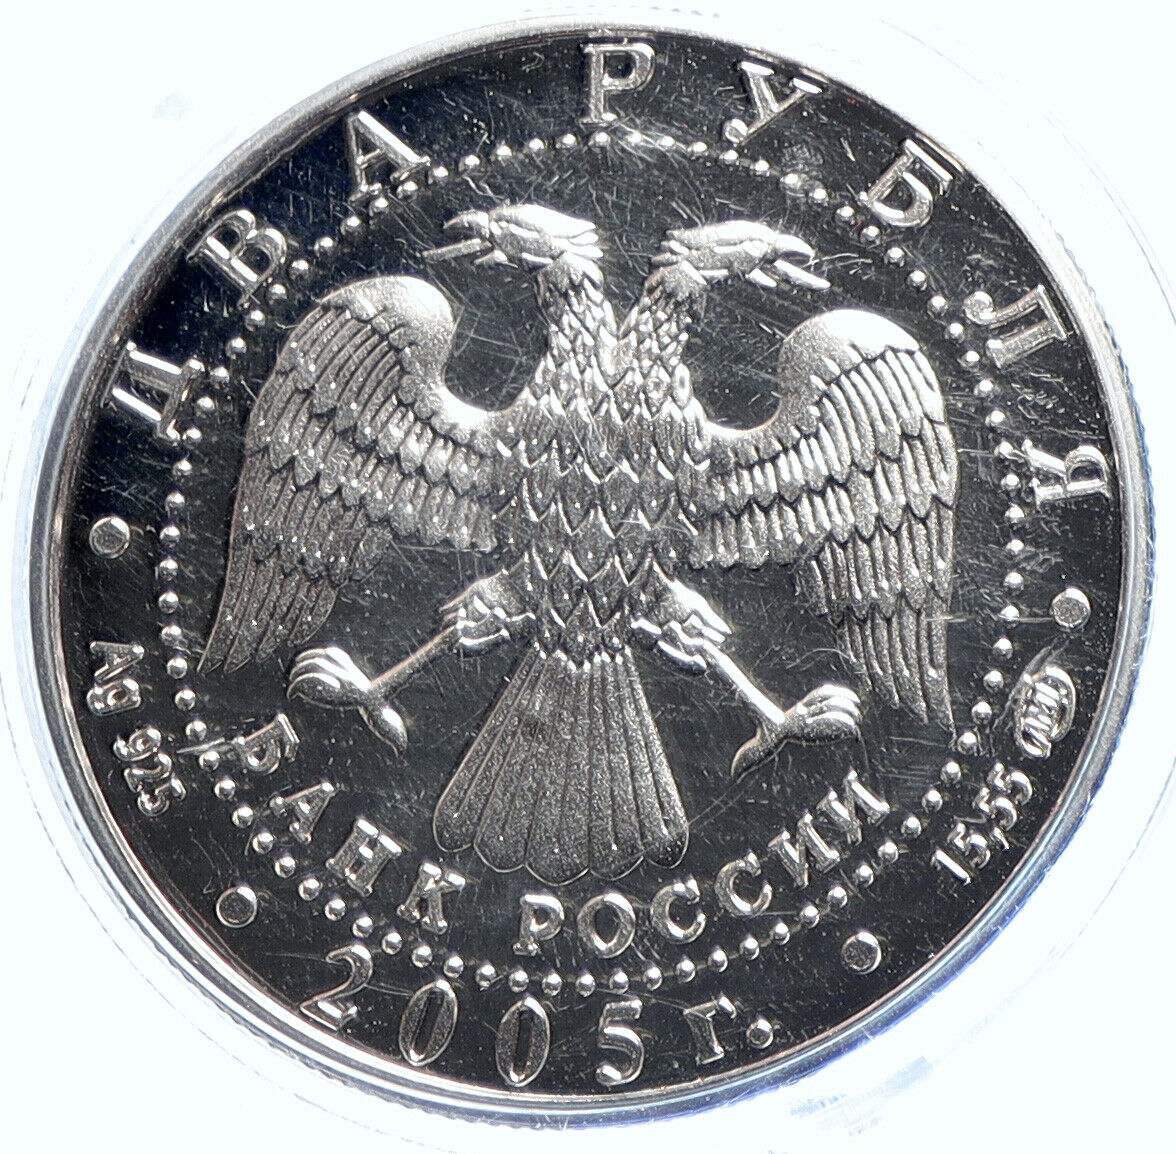 2005 RUSSIA Zodiac Astrology Sign of LIBRA Proof Silver 2 Ruble Coin i104825